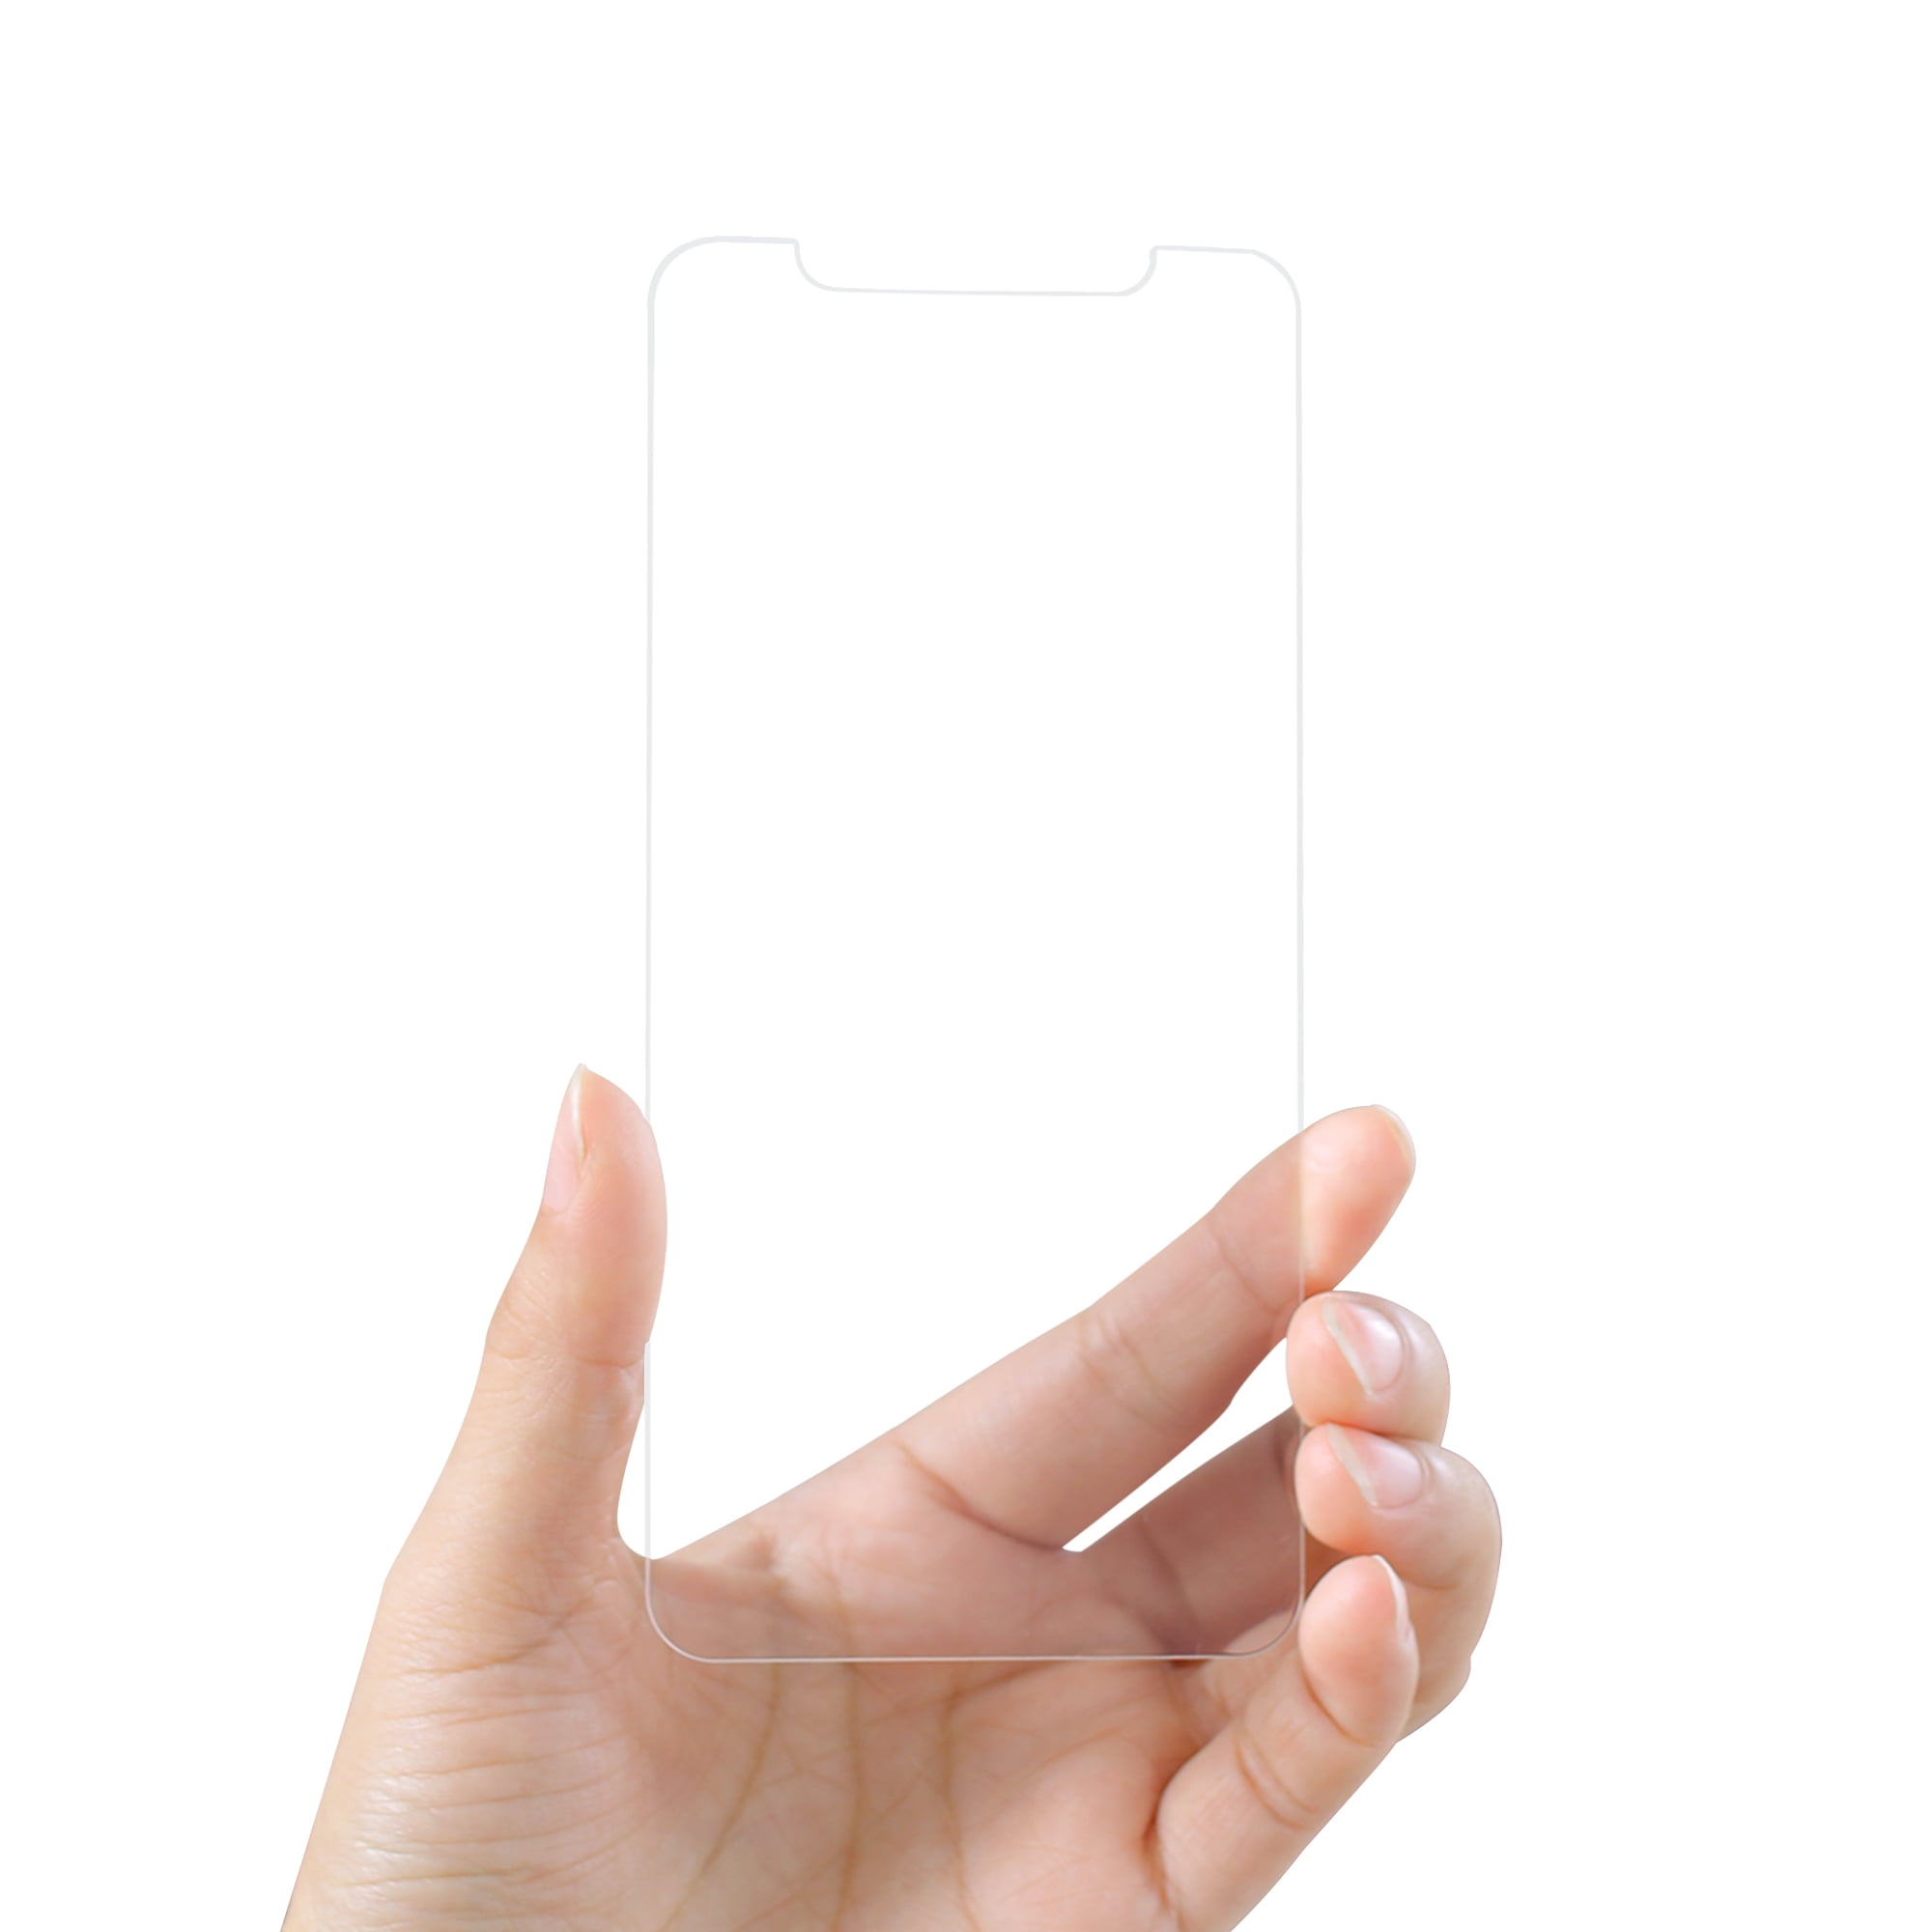 Preserver Super Hardness Glass Screen Protector for iPhone X